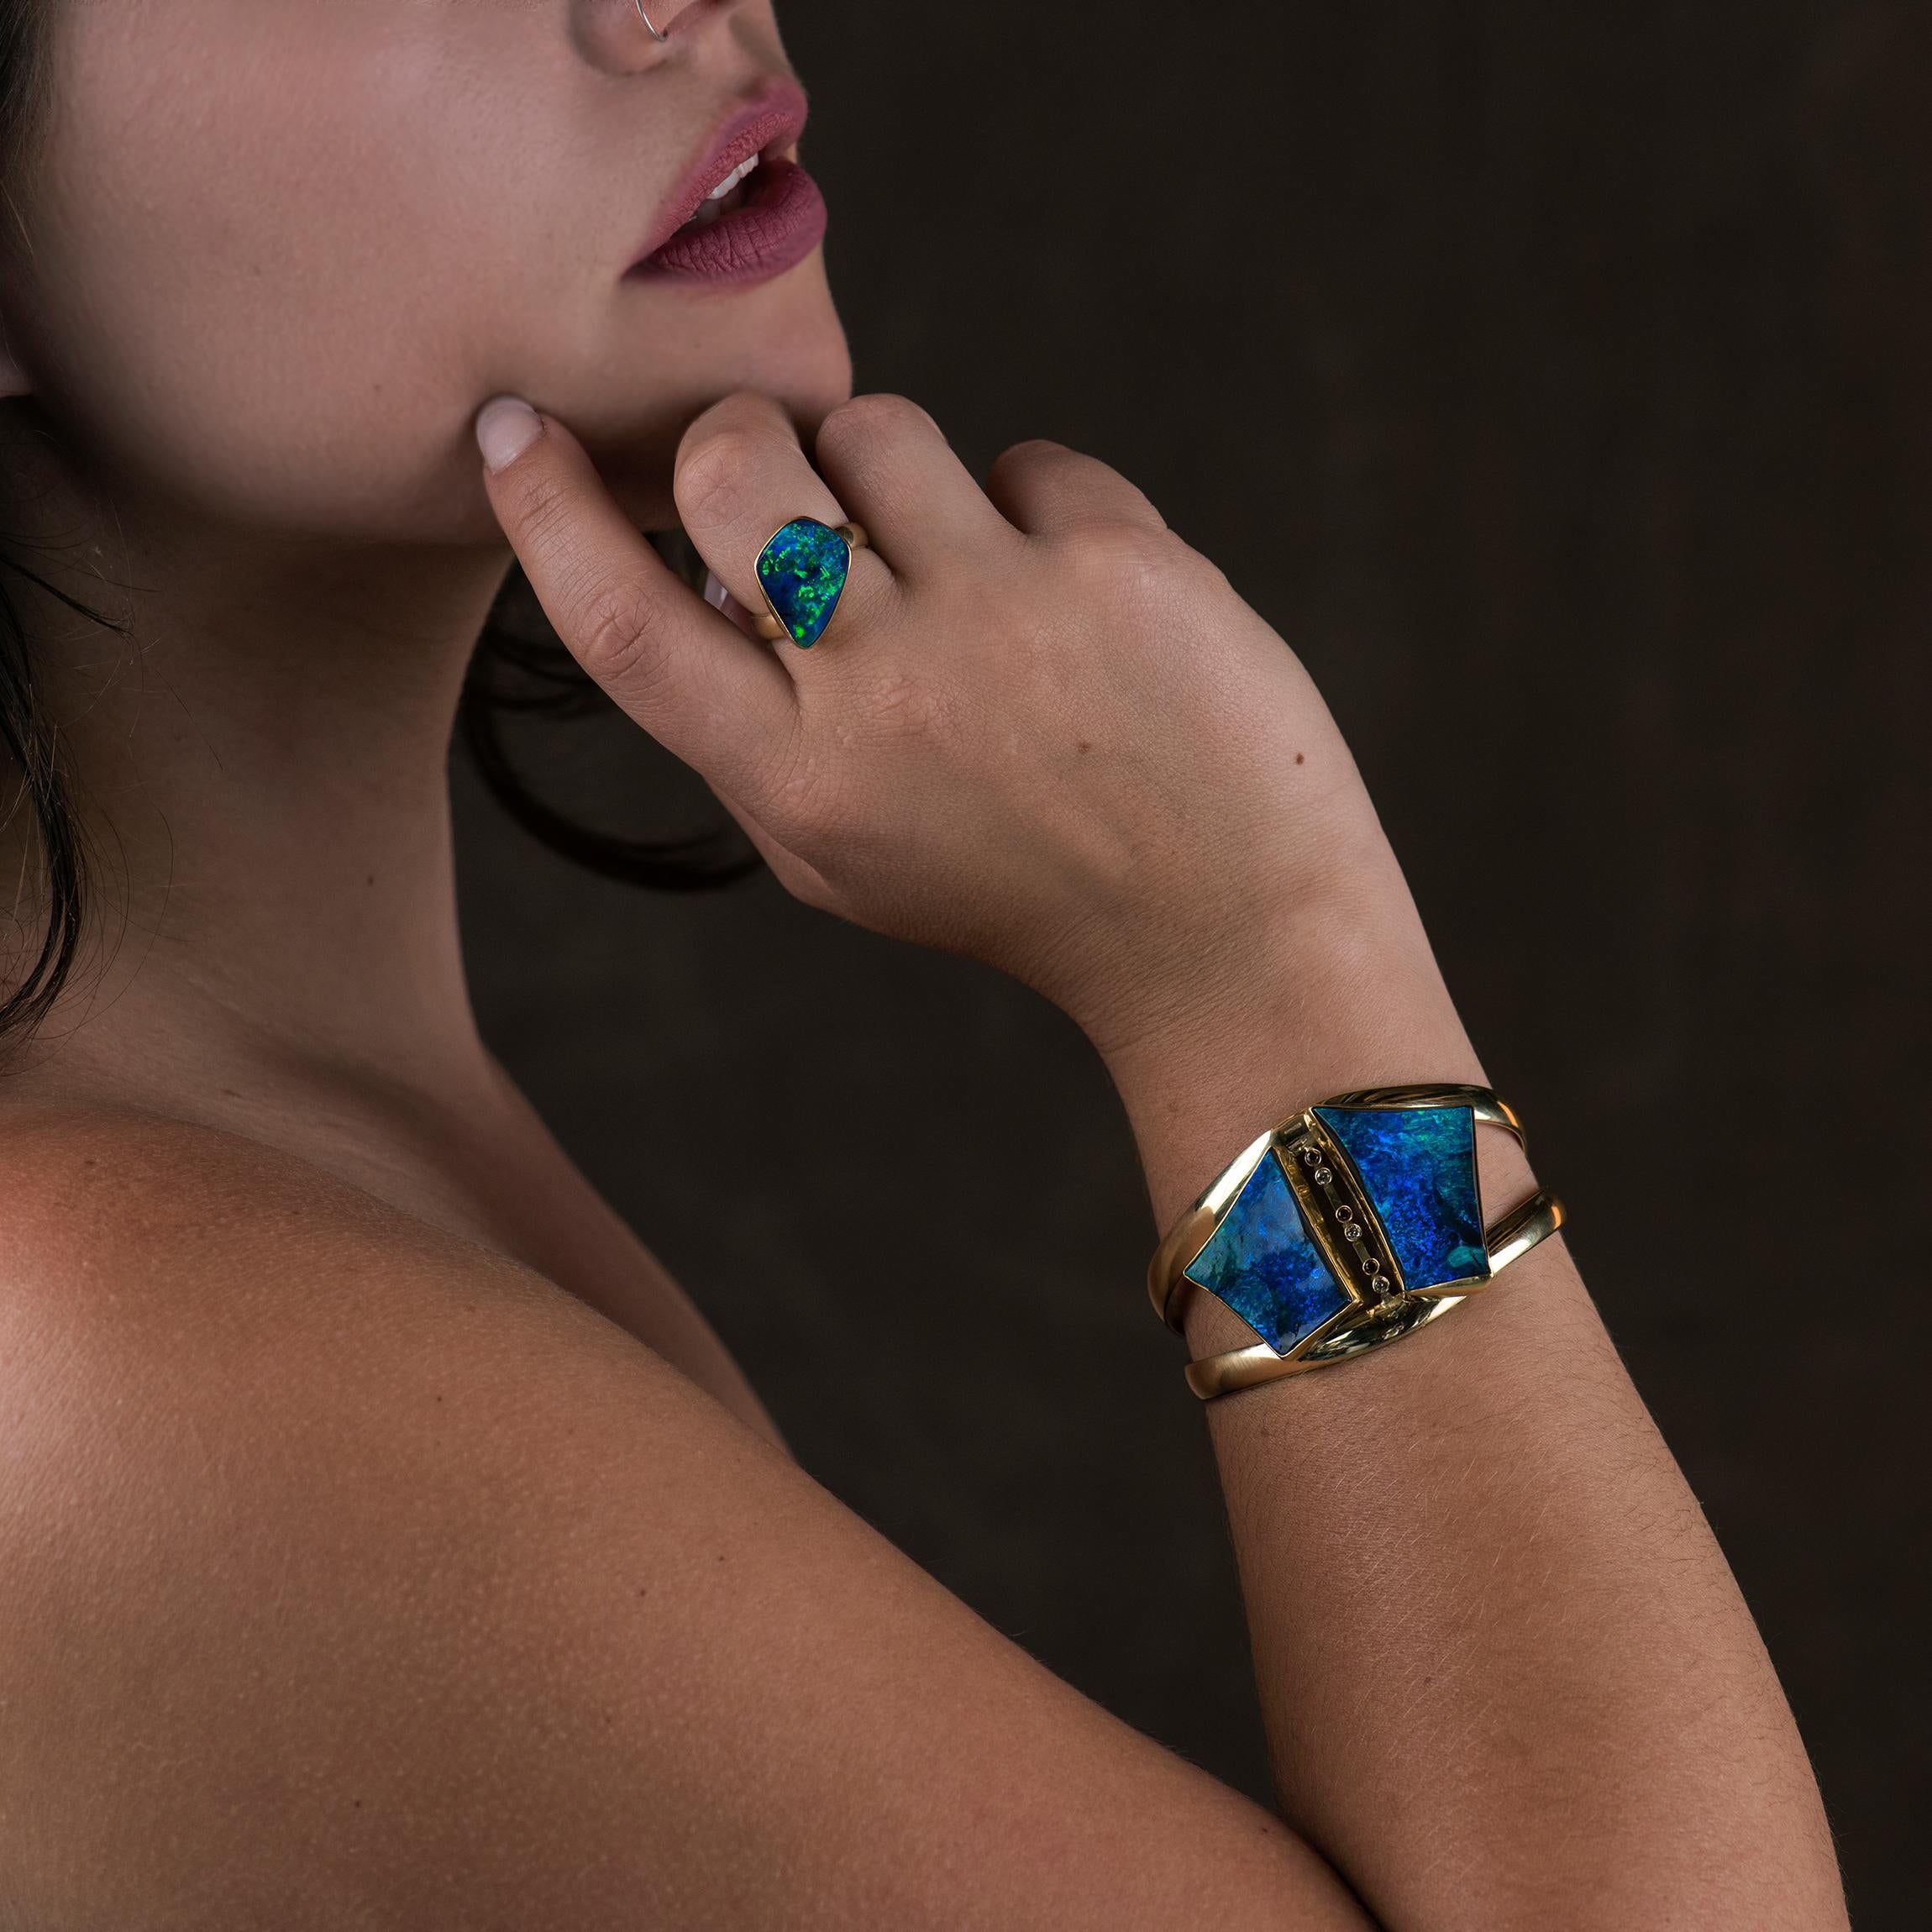 Classic and classy blue green boulder opal, cut in unique shapes, and fabricated into a weighty gold cuff of 22k and 18k gold.  The cuff bracelet is accented with diamonds and champagne zircons.  The boulder opal rough had such a large clean face of